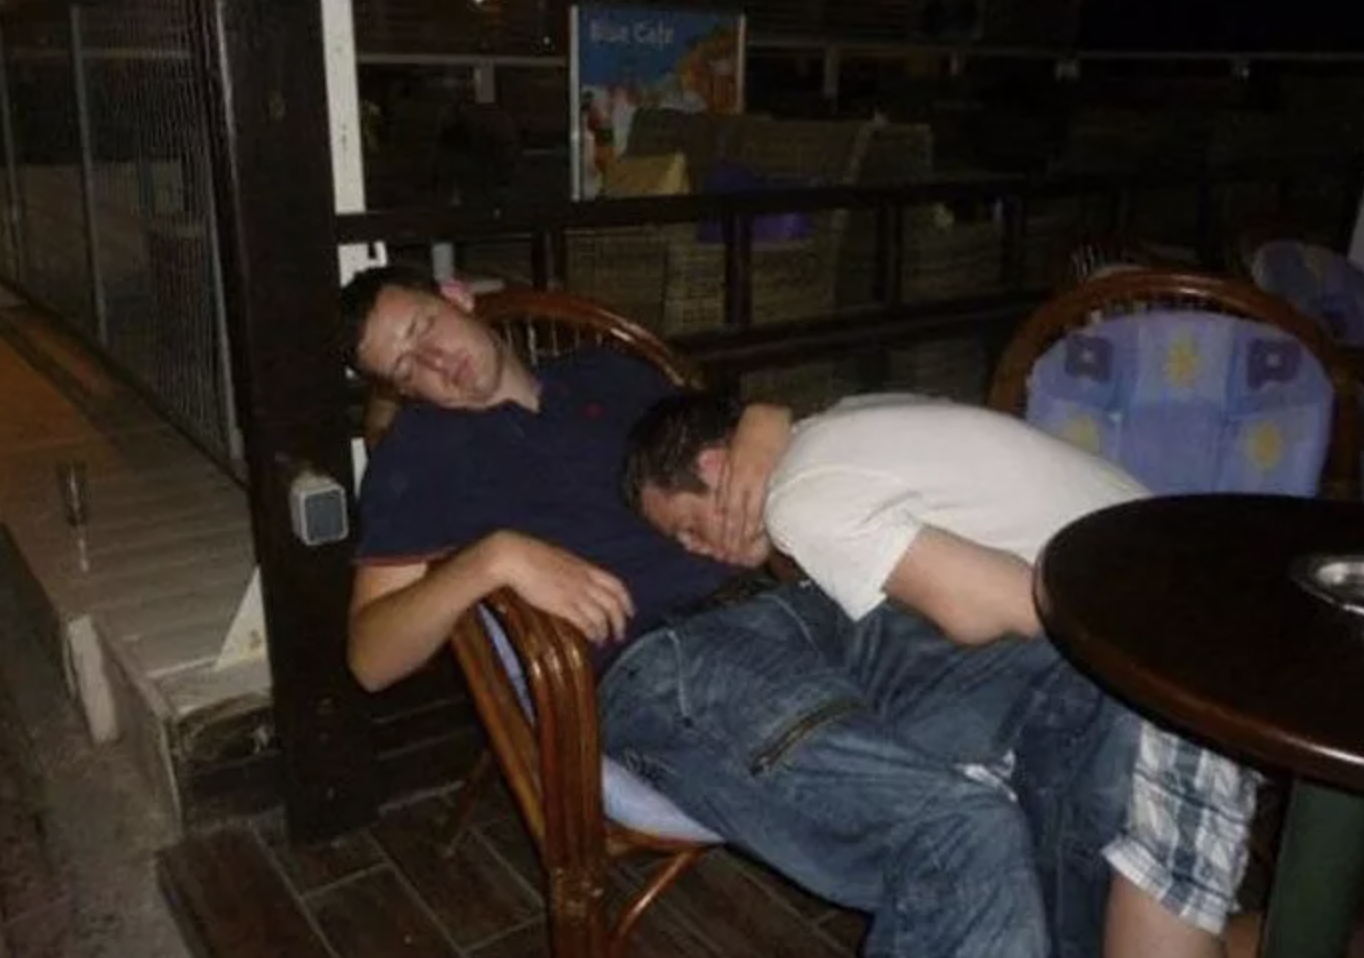 Men sleep after stag party | Source:Shutterstock.com